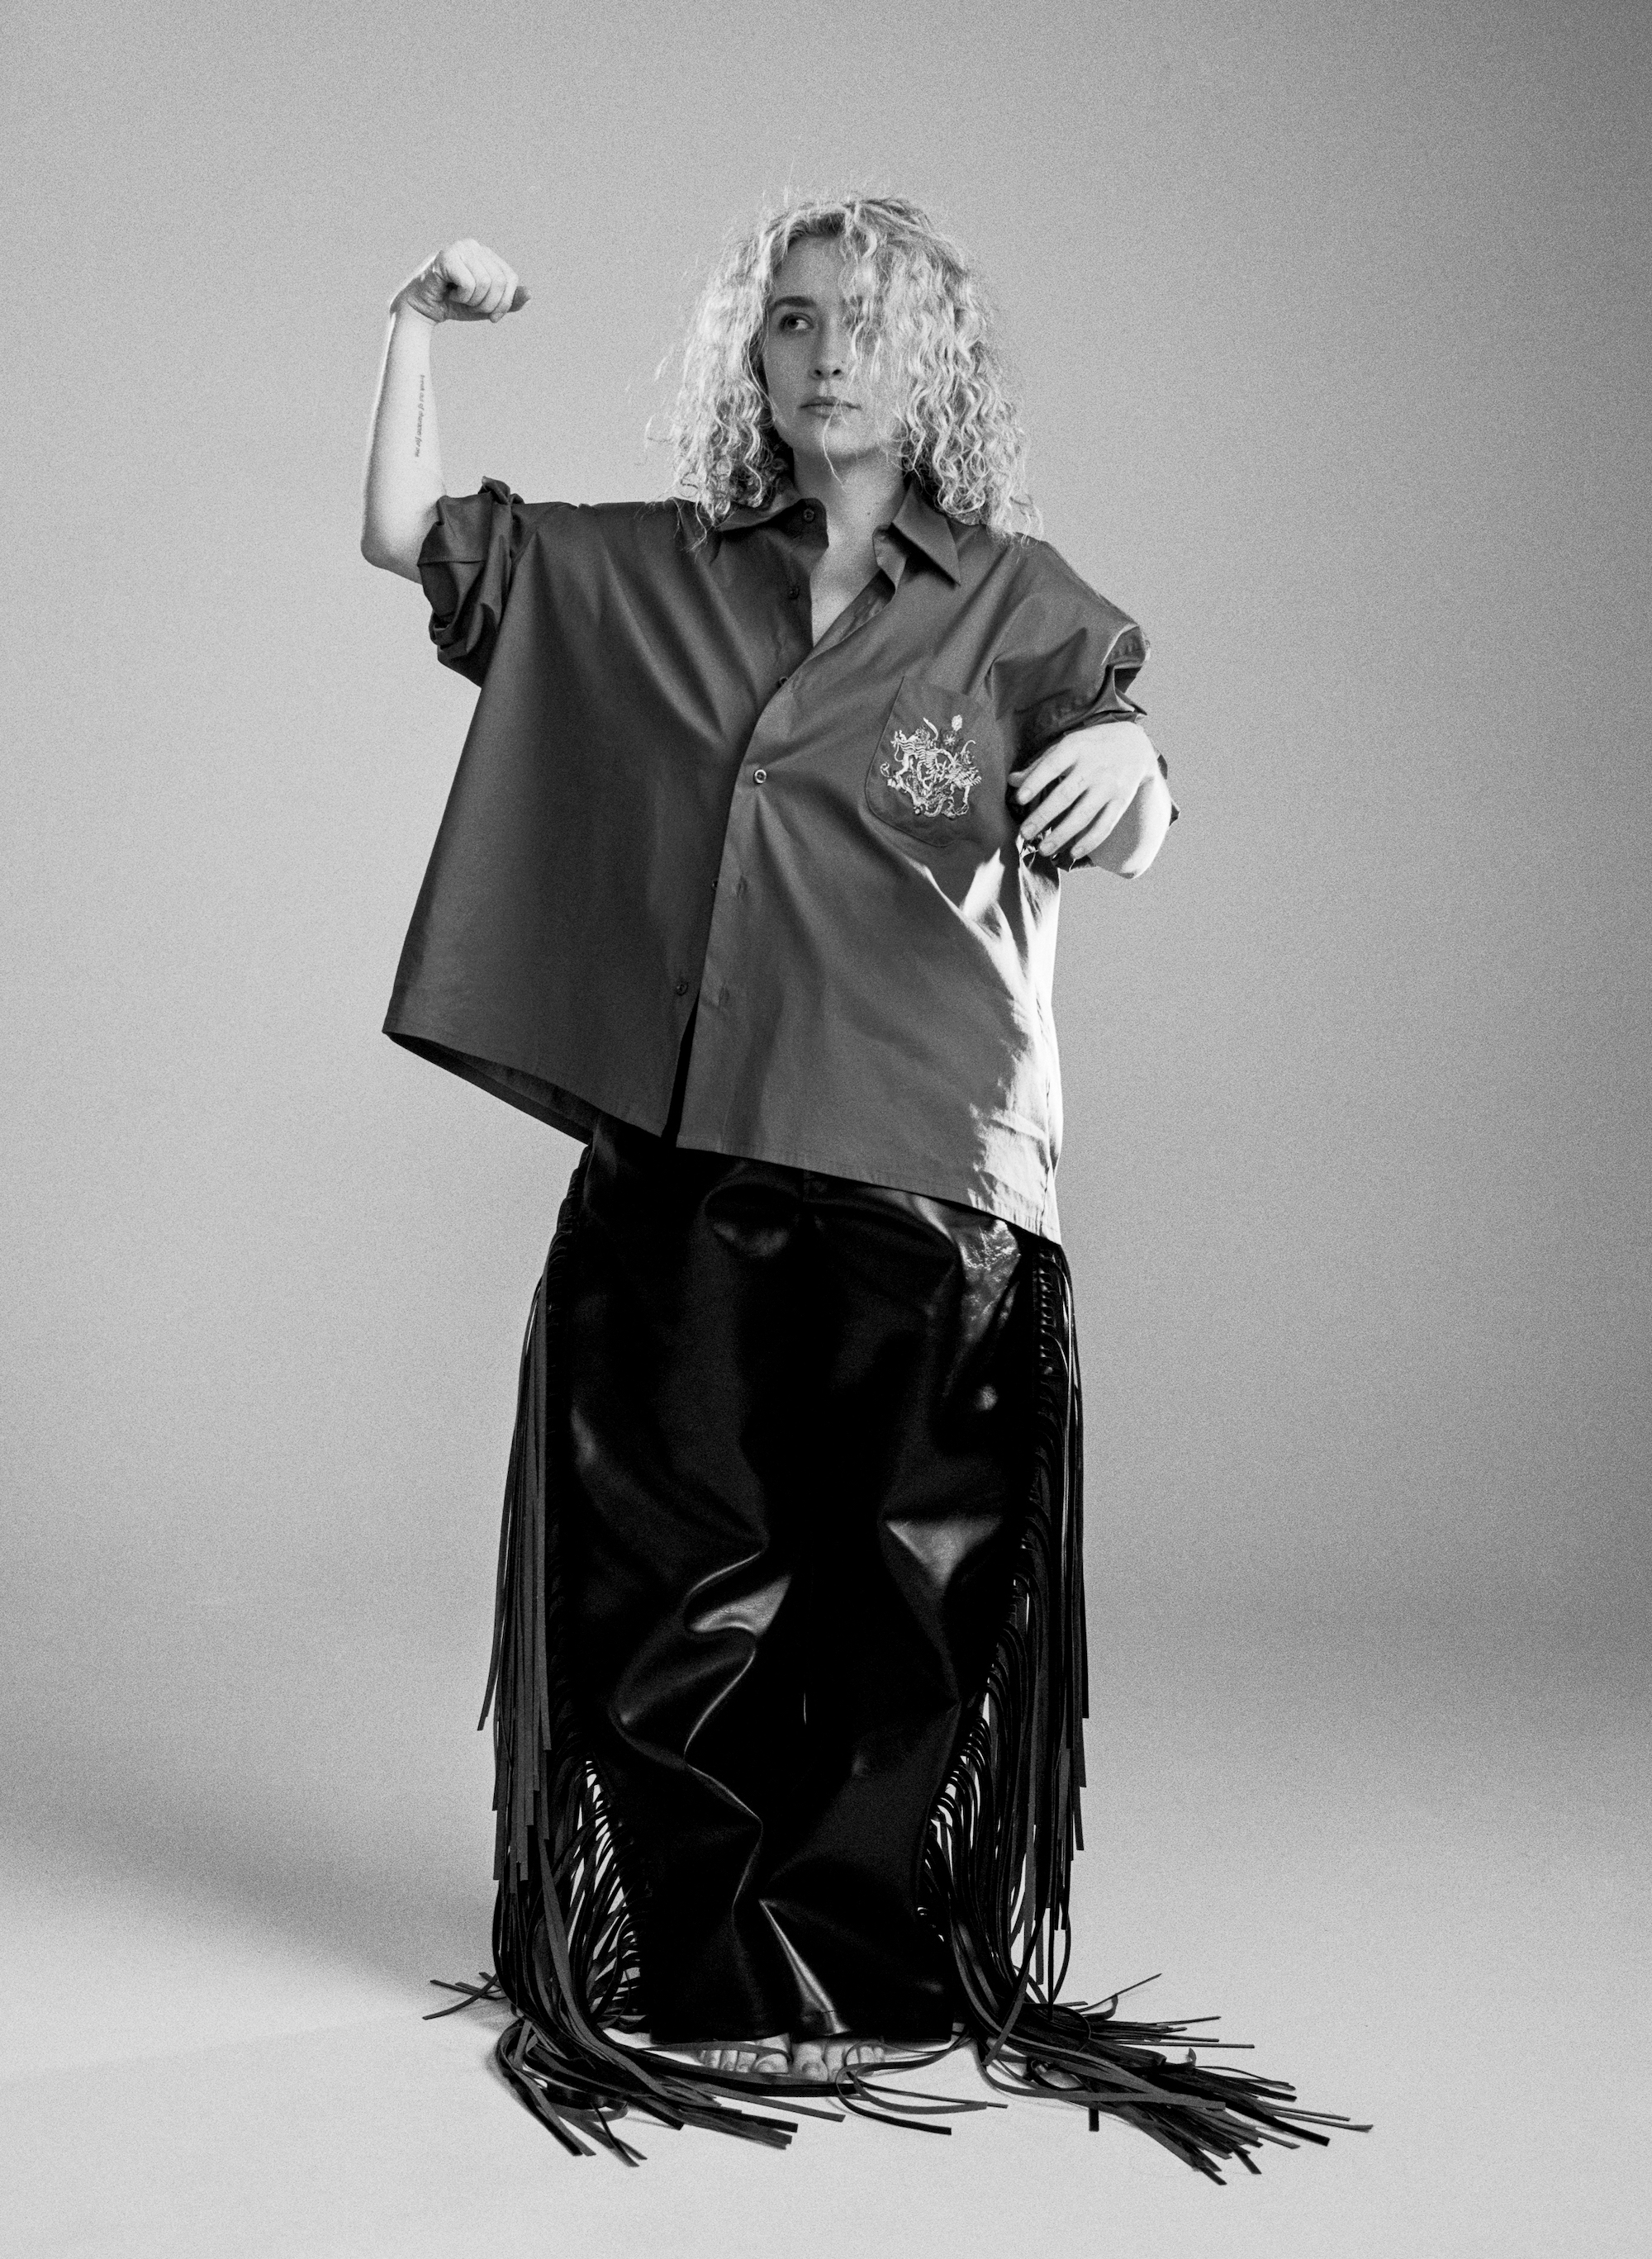 blondshell standing and making a fist wearing an oversized shirt and fringe trousers